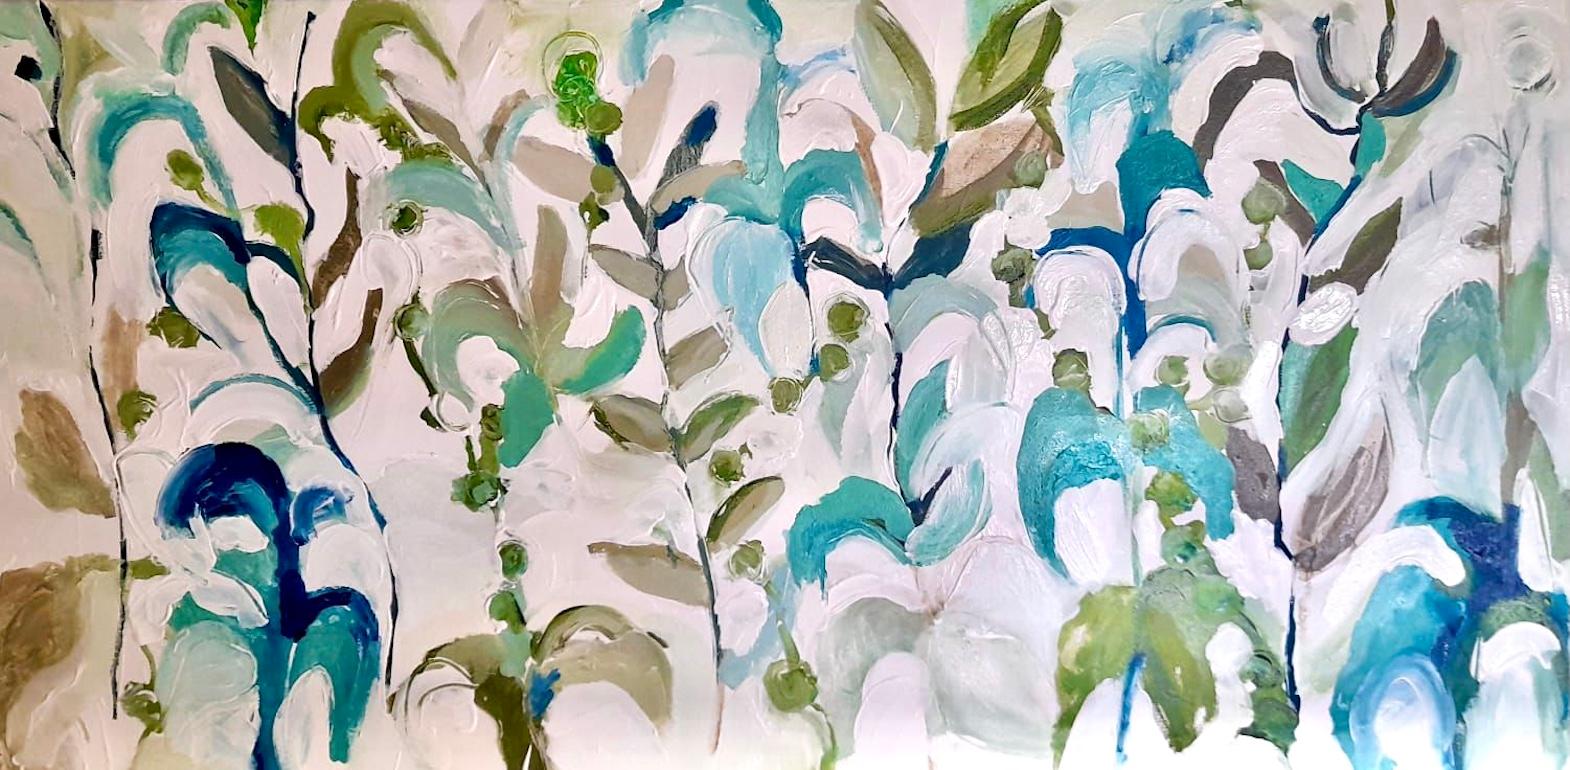 Oil White Tangle, Original Painting, Floral, Abstract art, Blue, Green, White